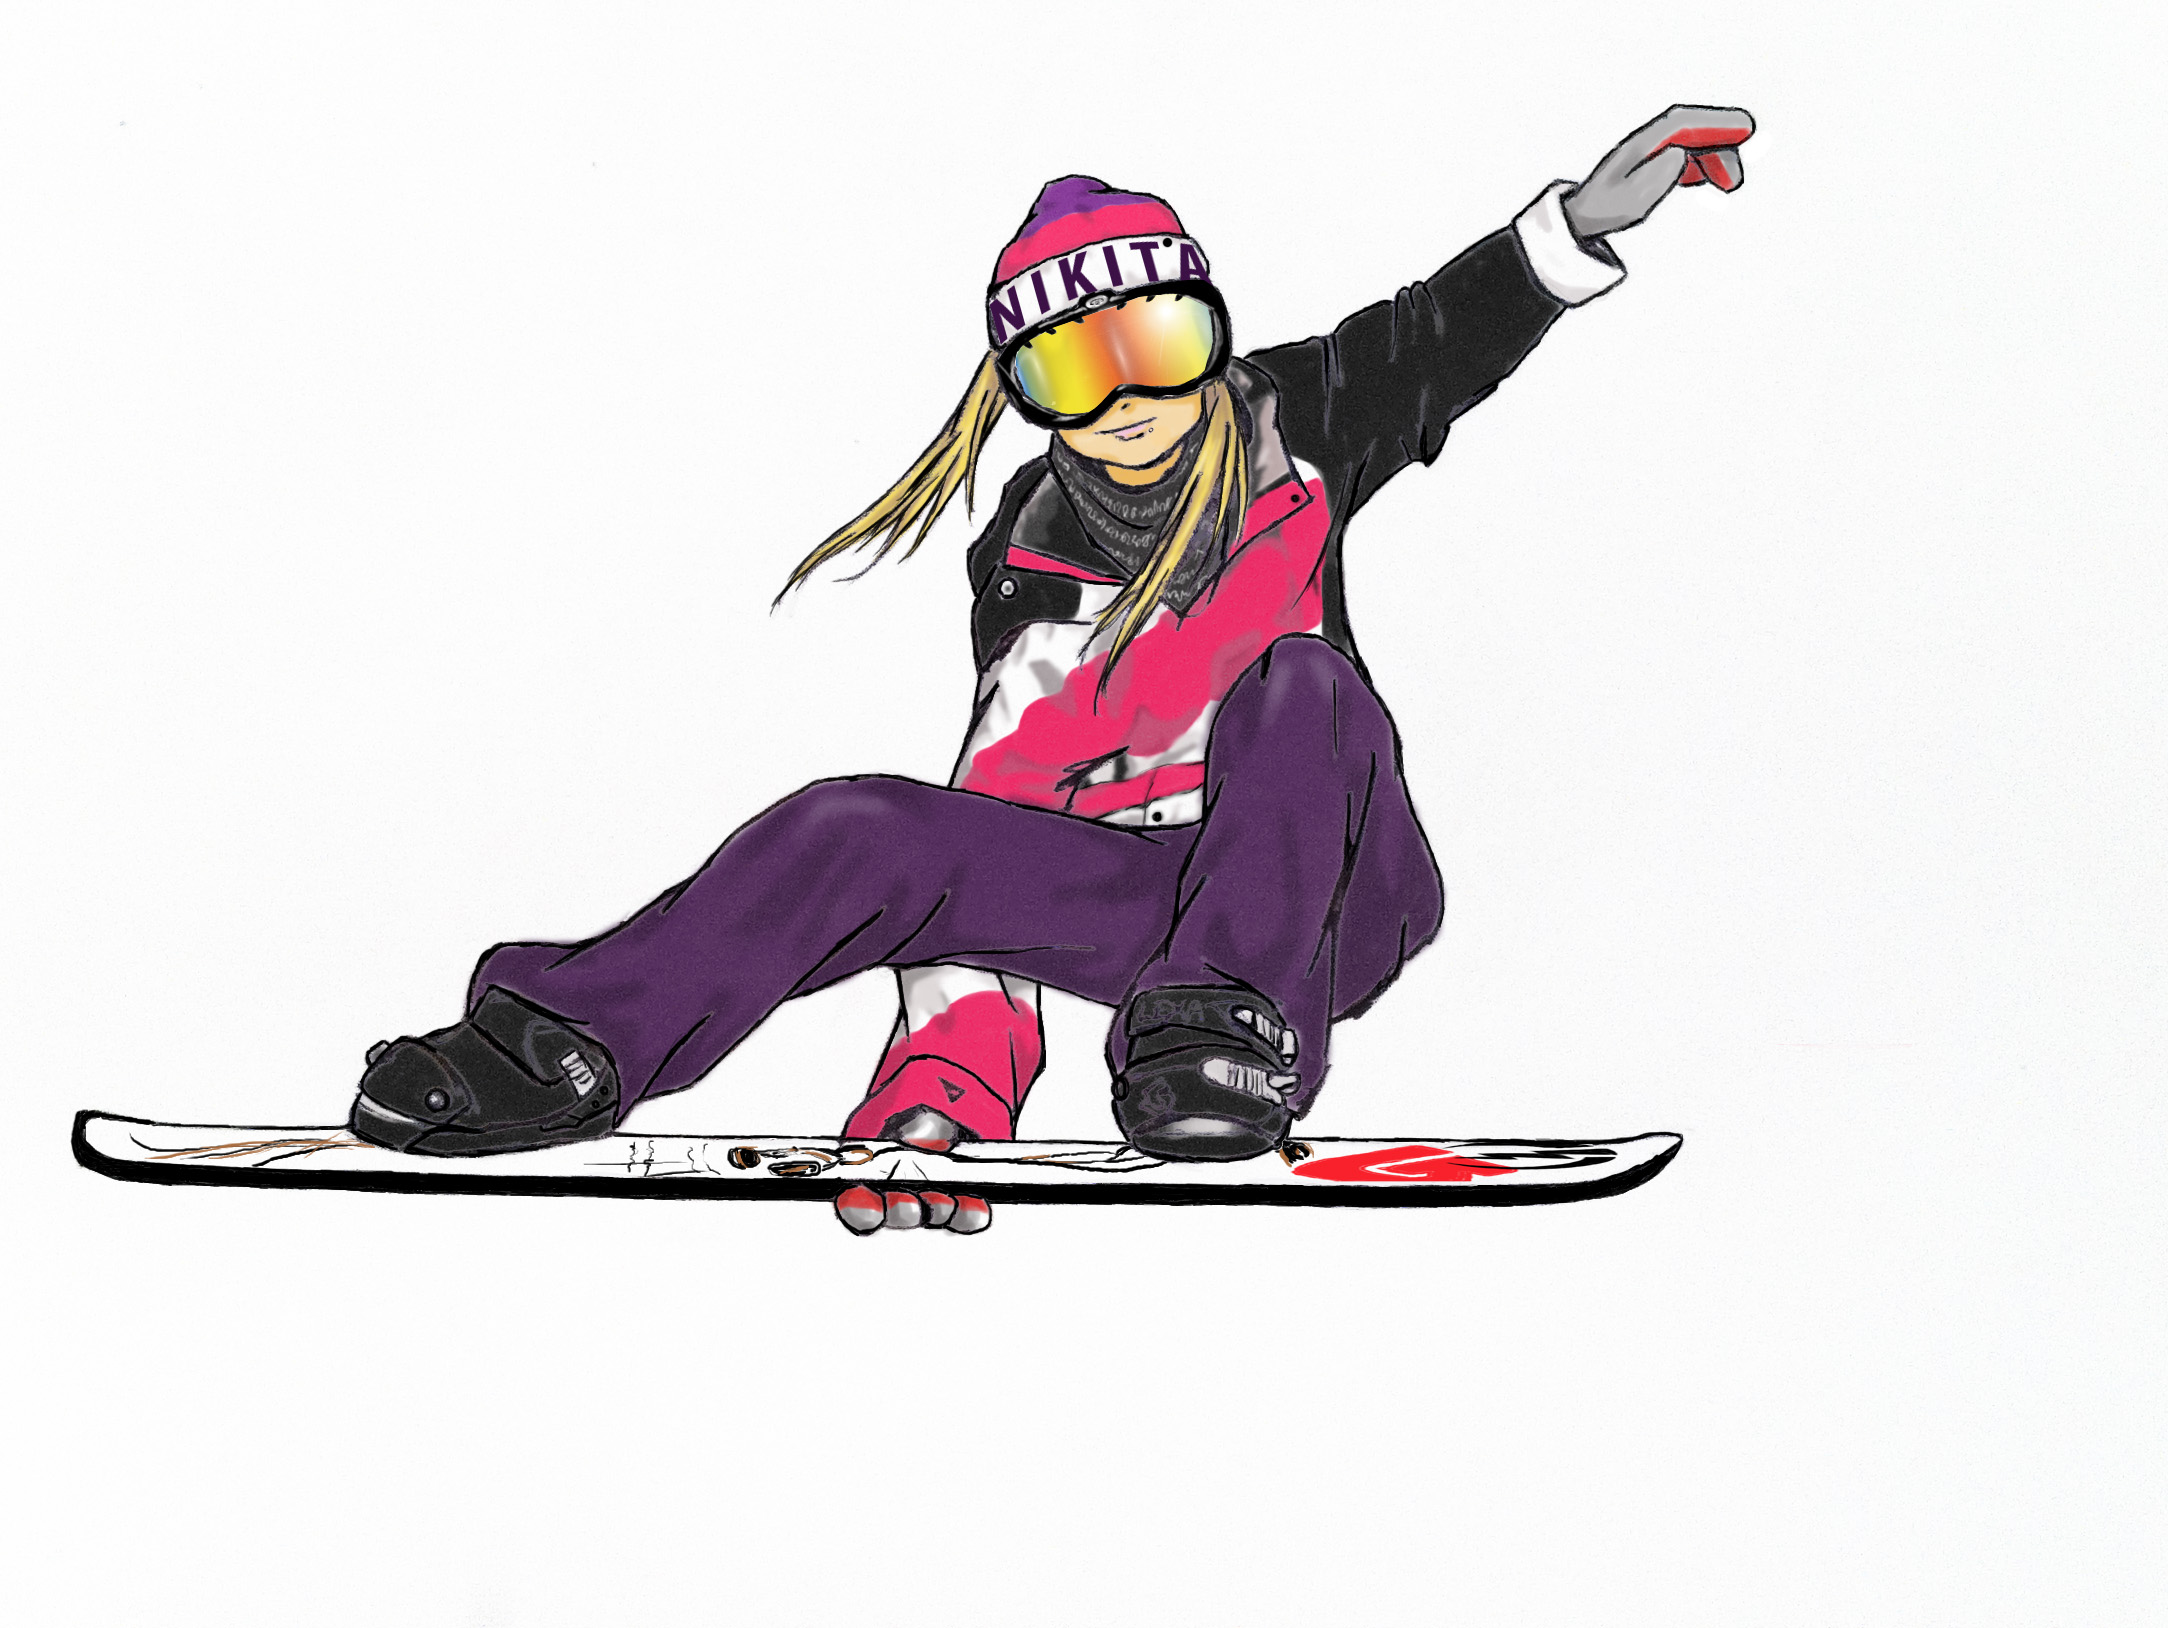 Snowboard Drawing at GetDrawings.com | Free for personal use ...